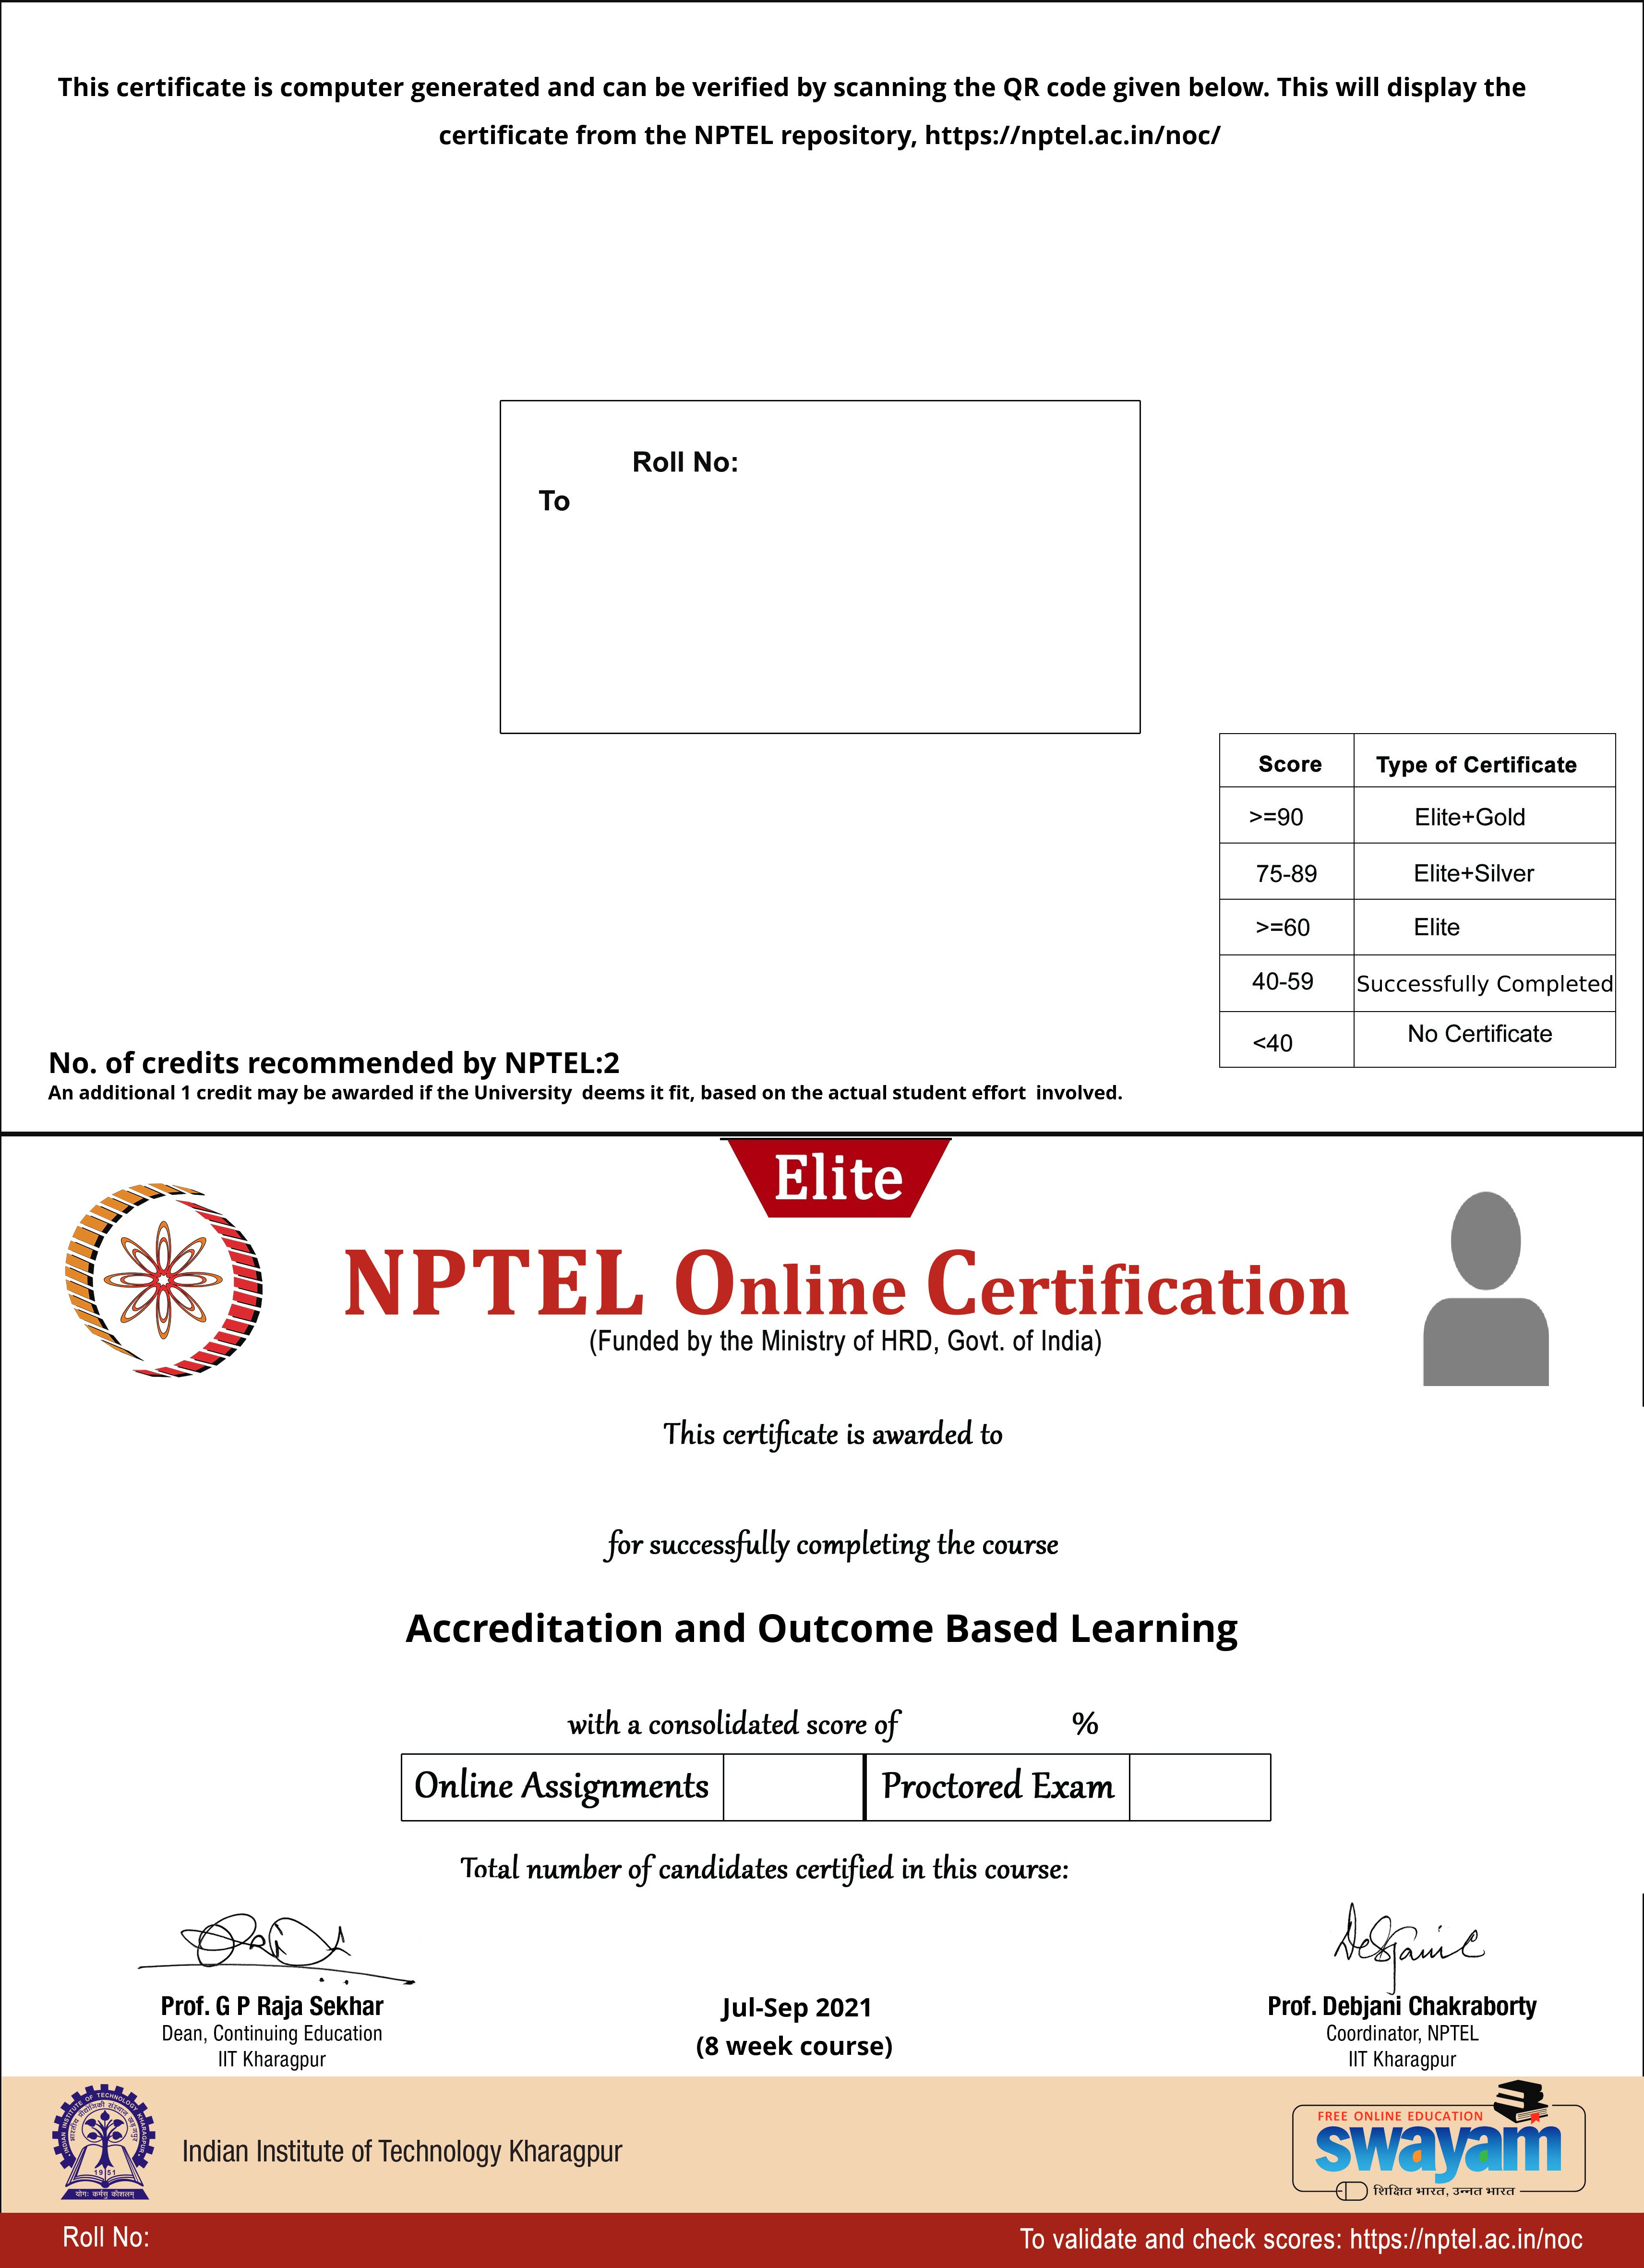 accreditation and outcome based learning nptel assignment